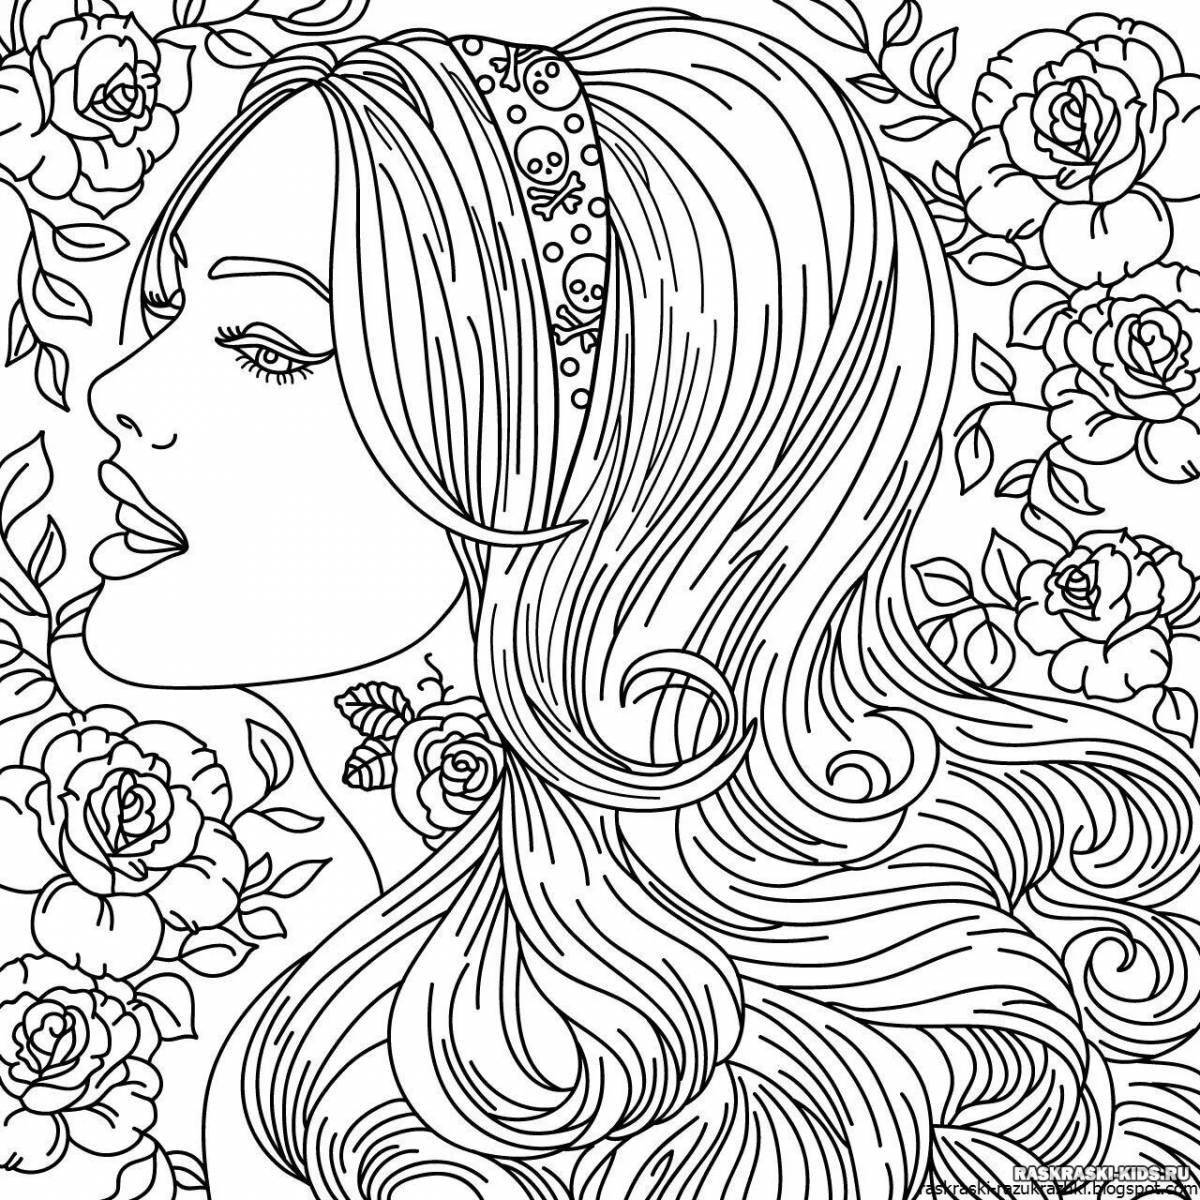 Delightful coloring for girls 14 years old